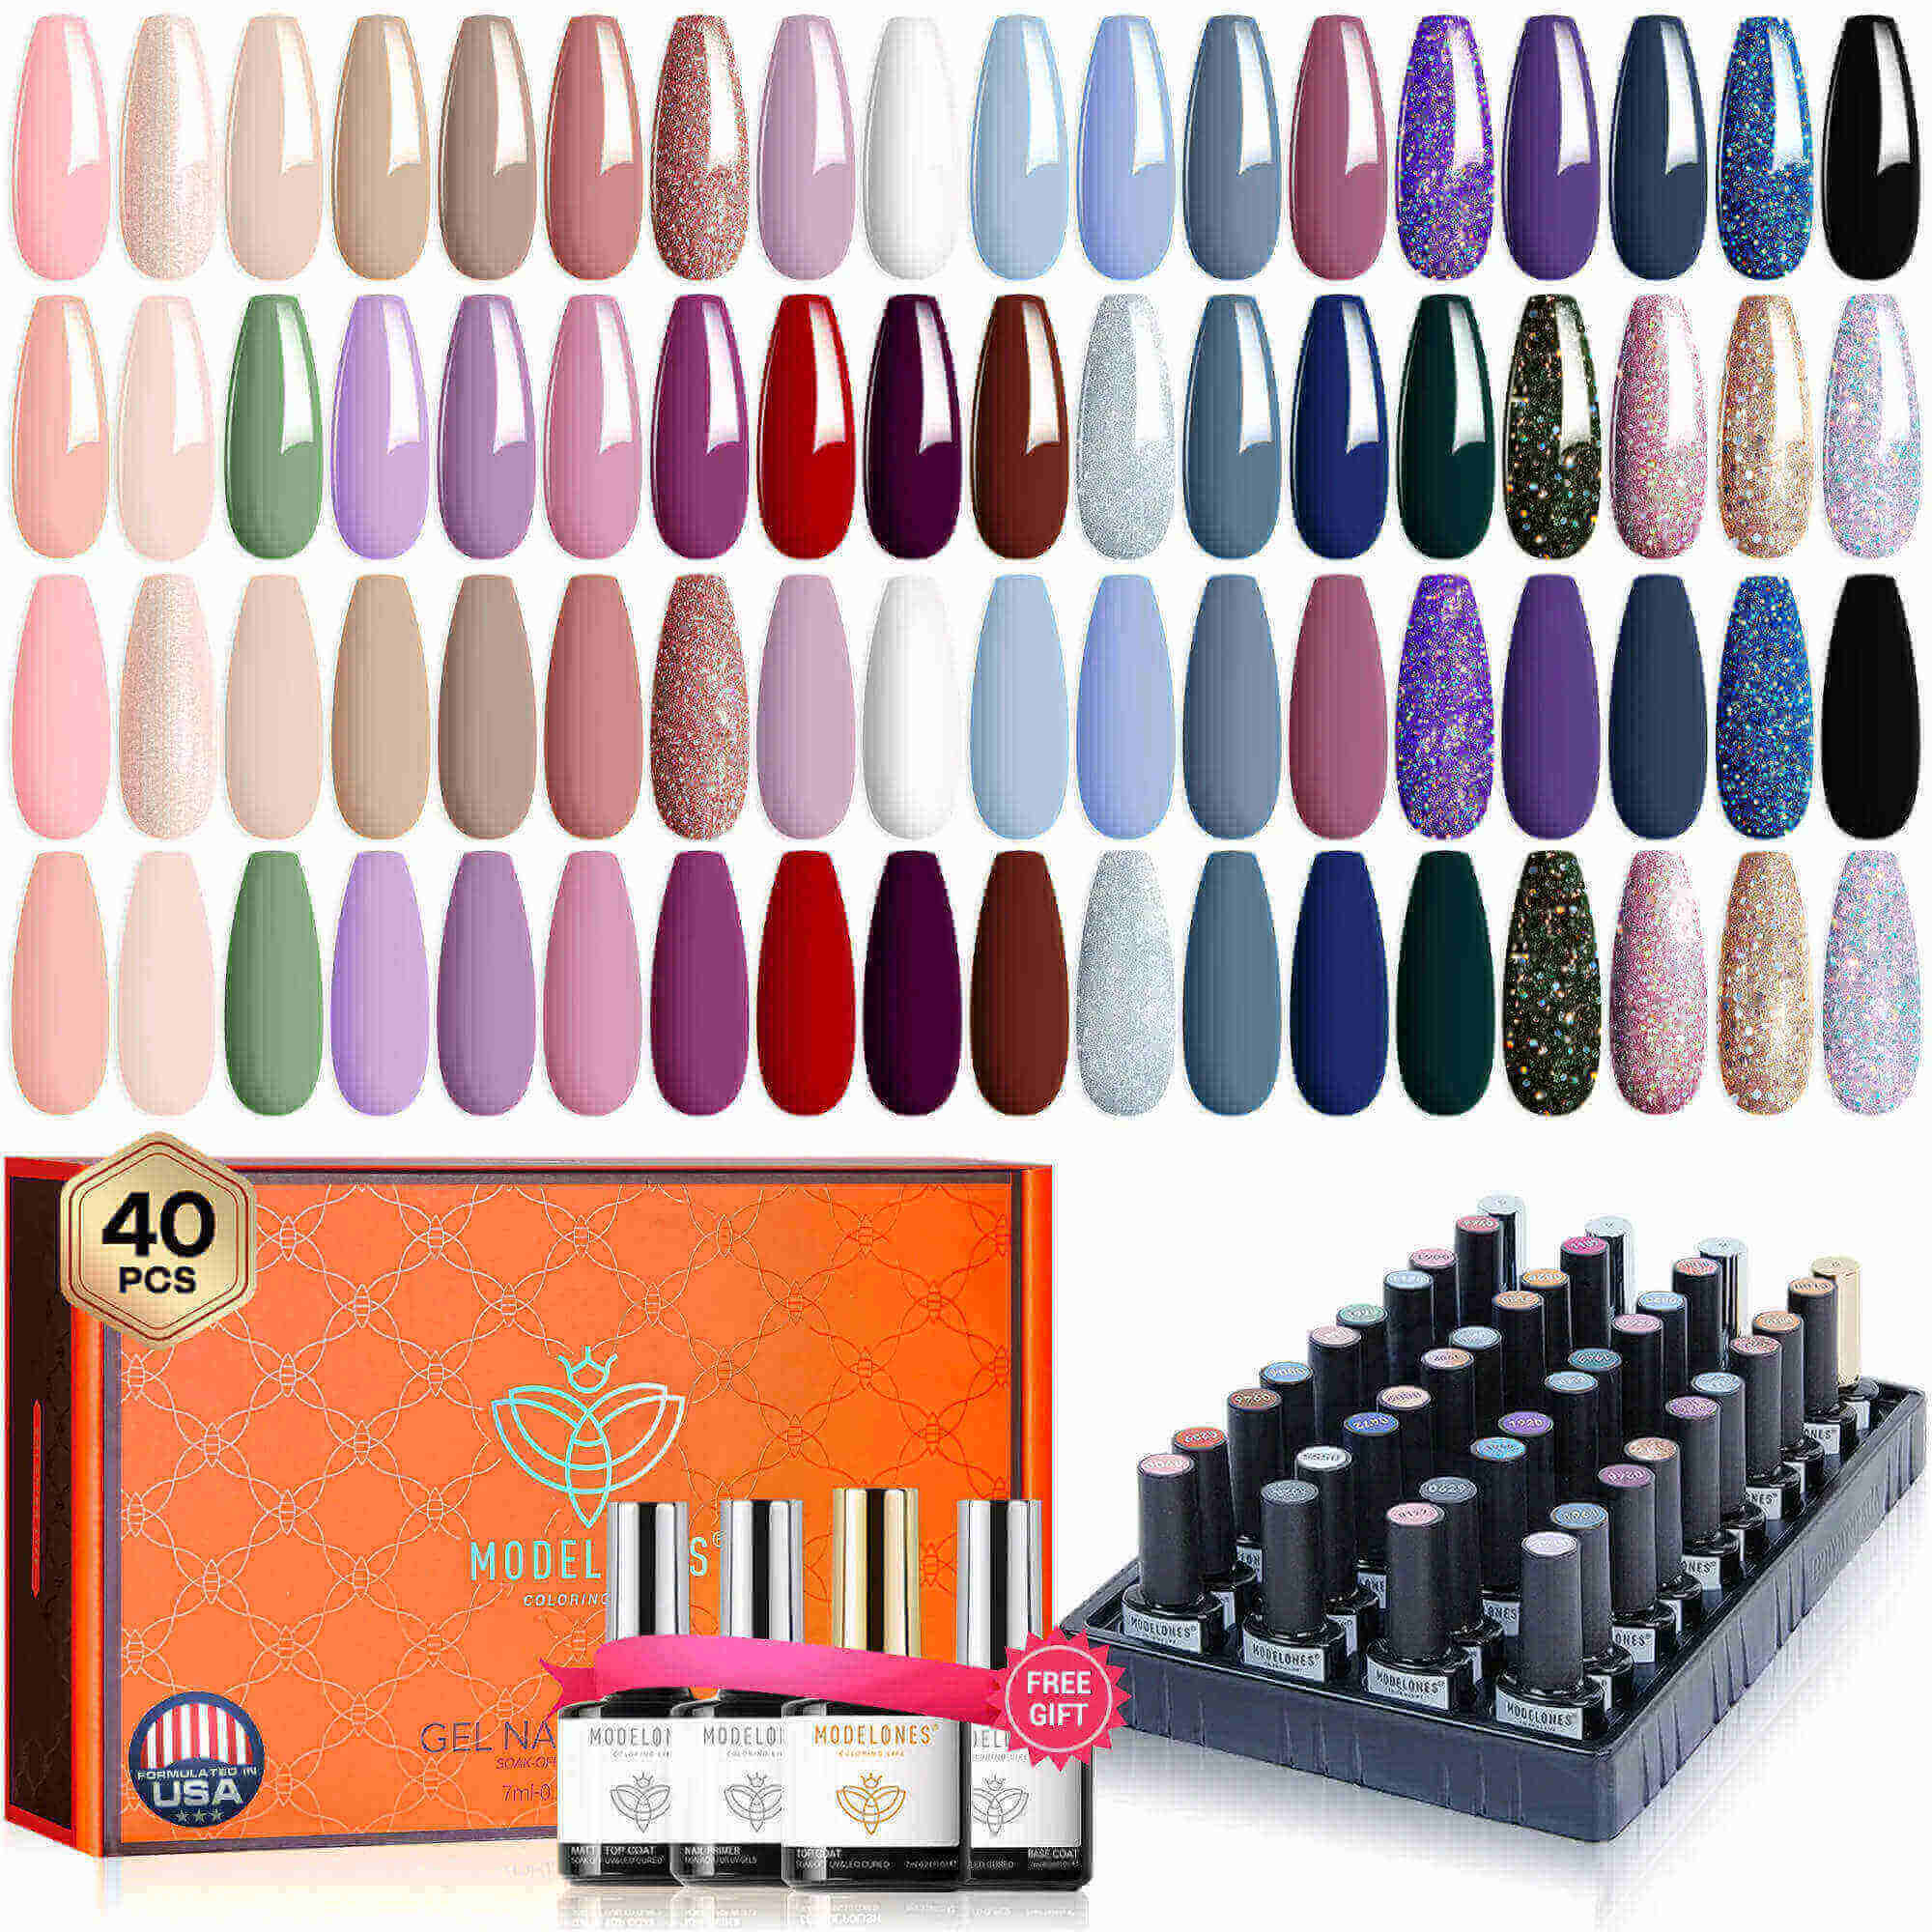 Latest Limited Edition - 40Pcs 36Colors Gel Nail Polish Set【US ONLY】